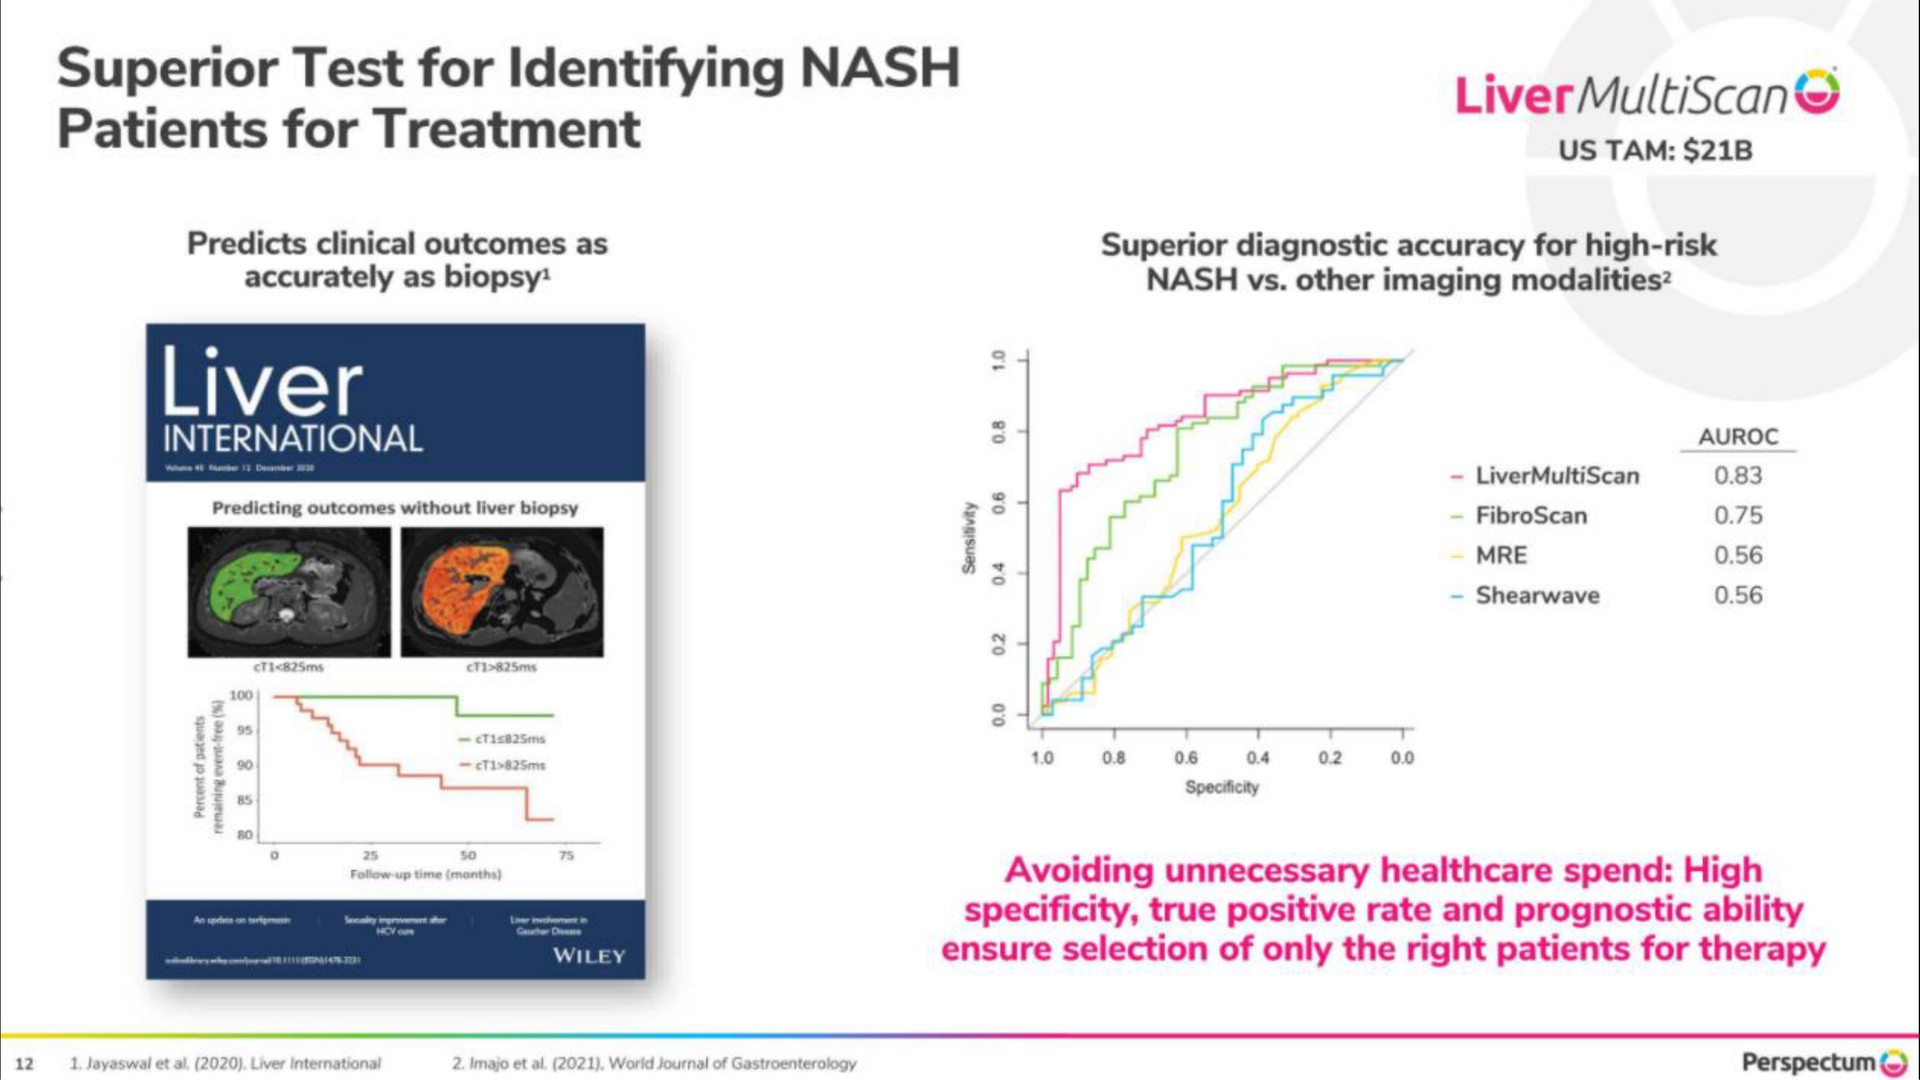 superior test for identifying nash patients treat for liver or liver | Perspectum